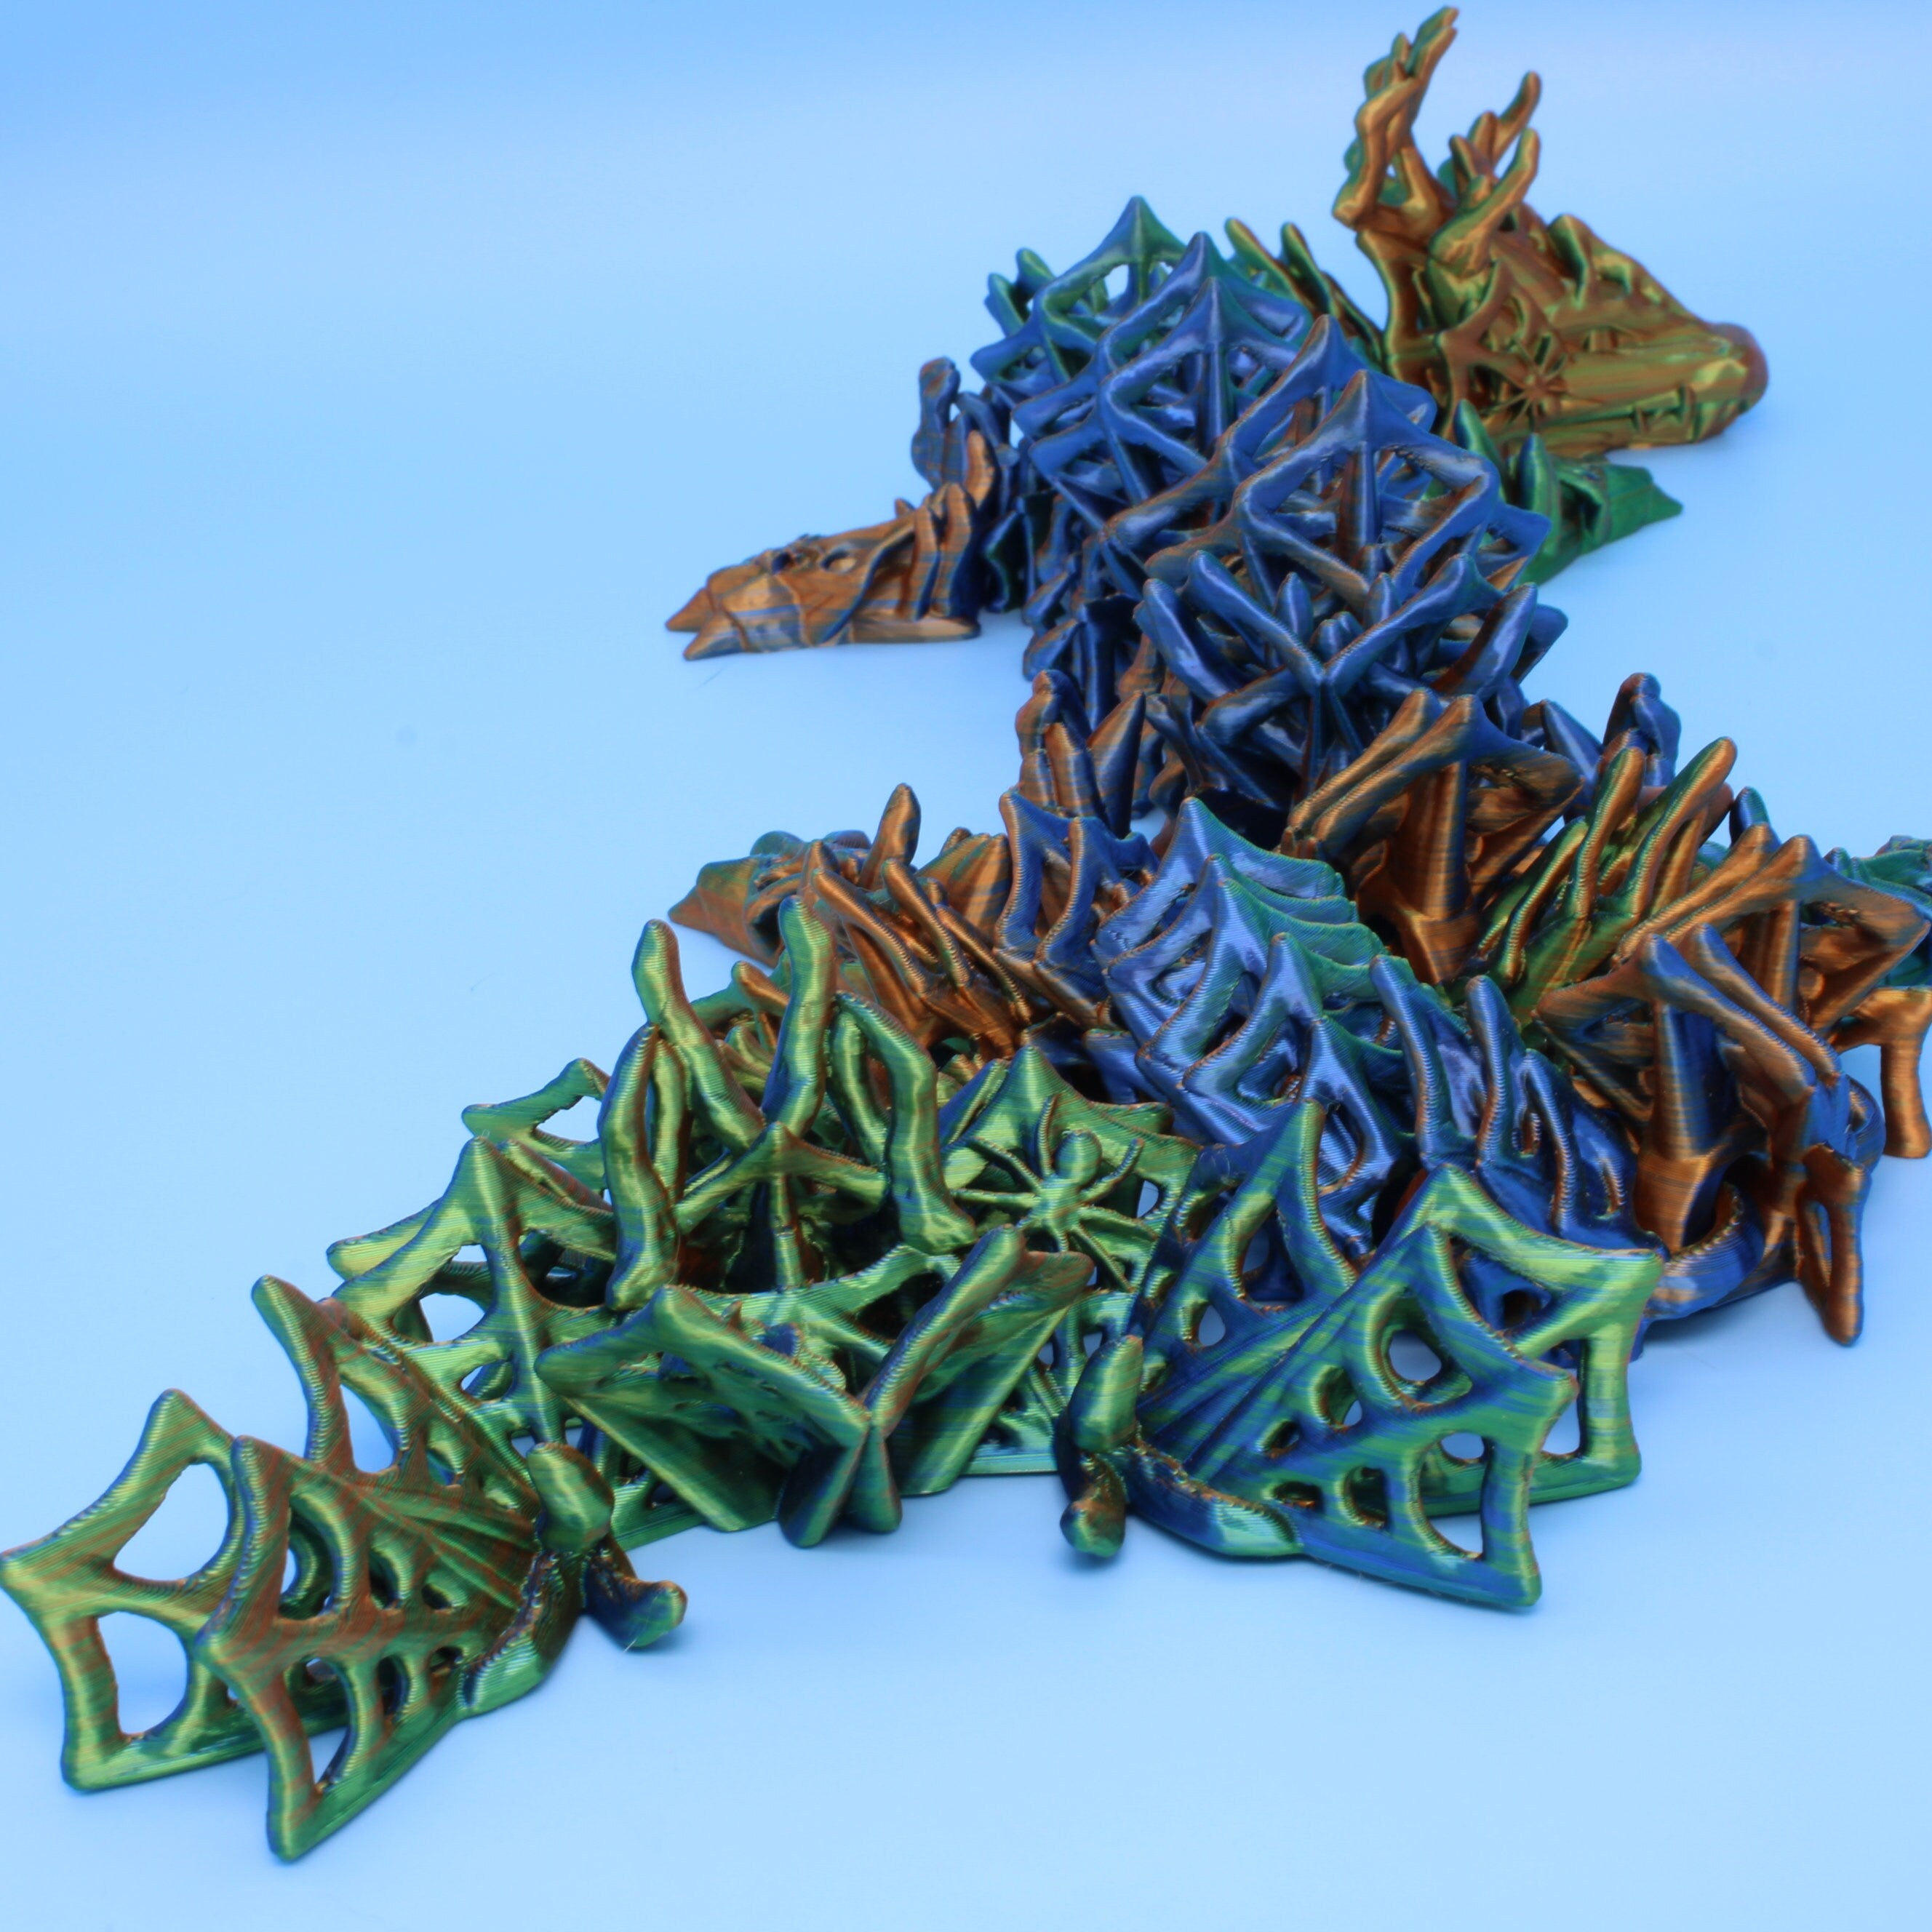 Wicked Dragon | 3D printed | Articulating Dragon | 19.5 in.